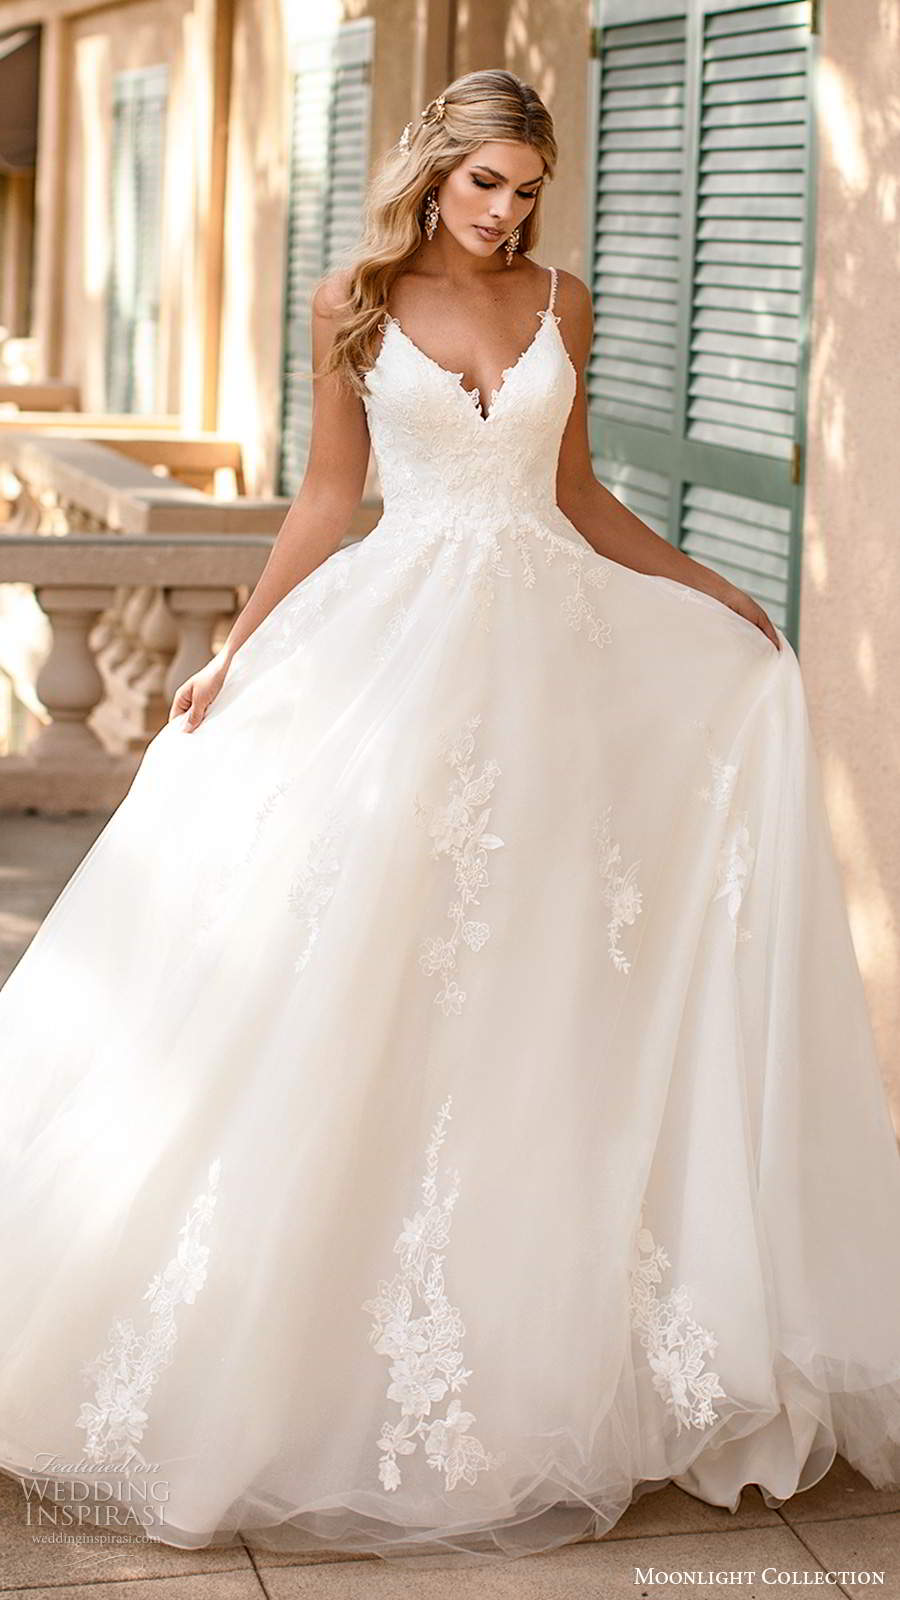 moonlight collection fall 2020 bridal sleeveless beaded straps v neckline embellished bodice a line ball gown wedding dress chapel train (11) mv